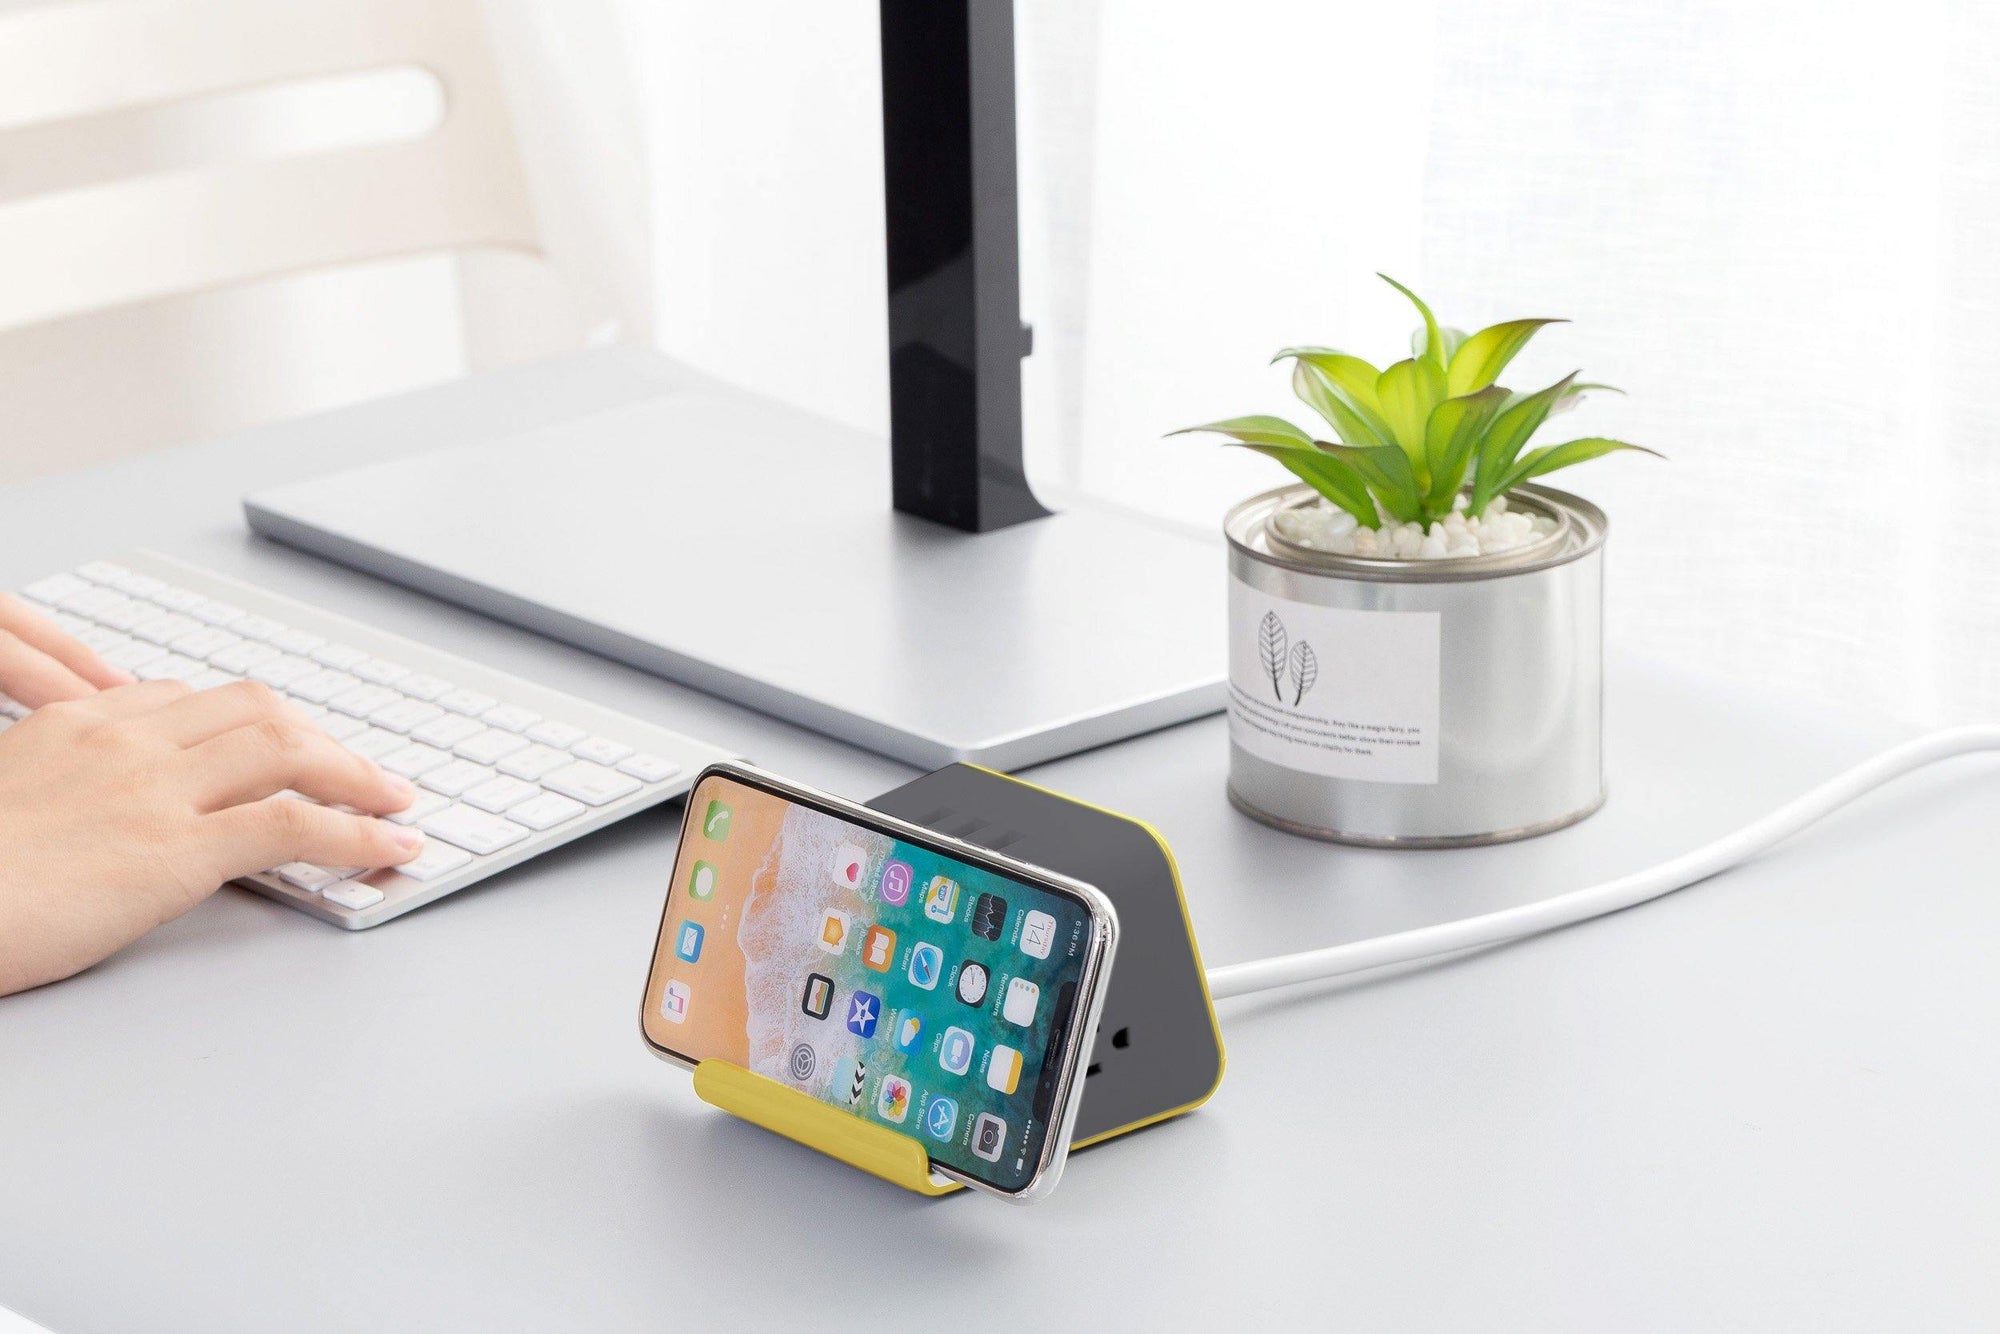 MyDesktop 29W Wireless Charging Stand with 3 USB Ports and 2 Power Outlets - Yellow